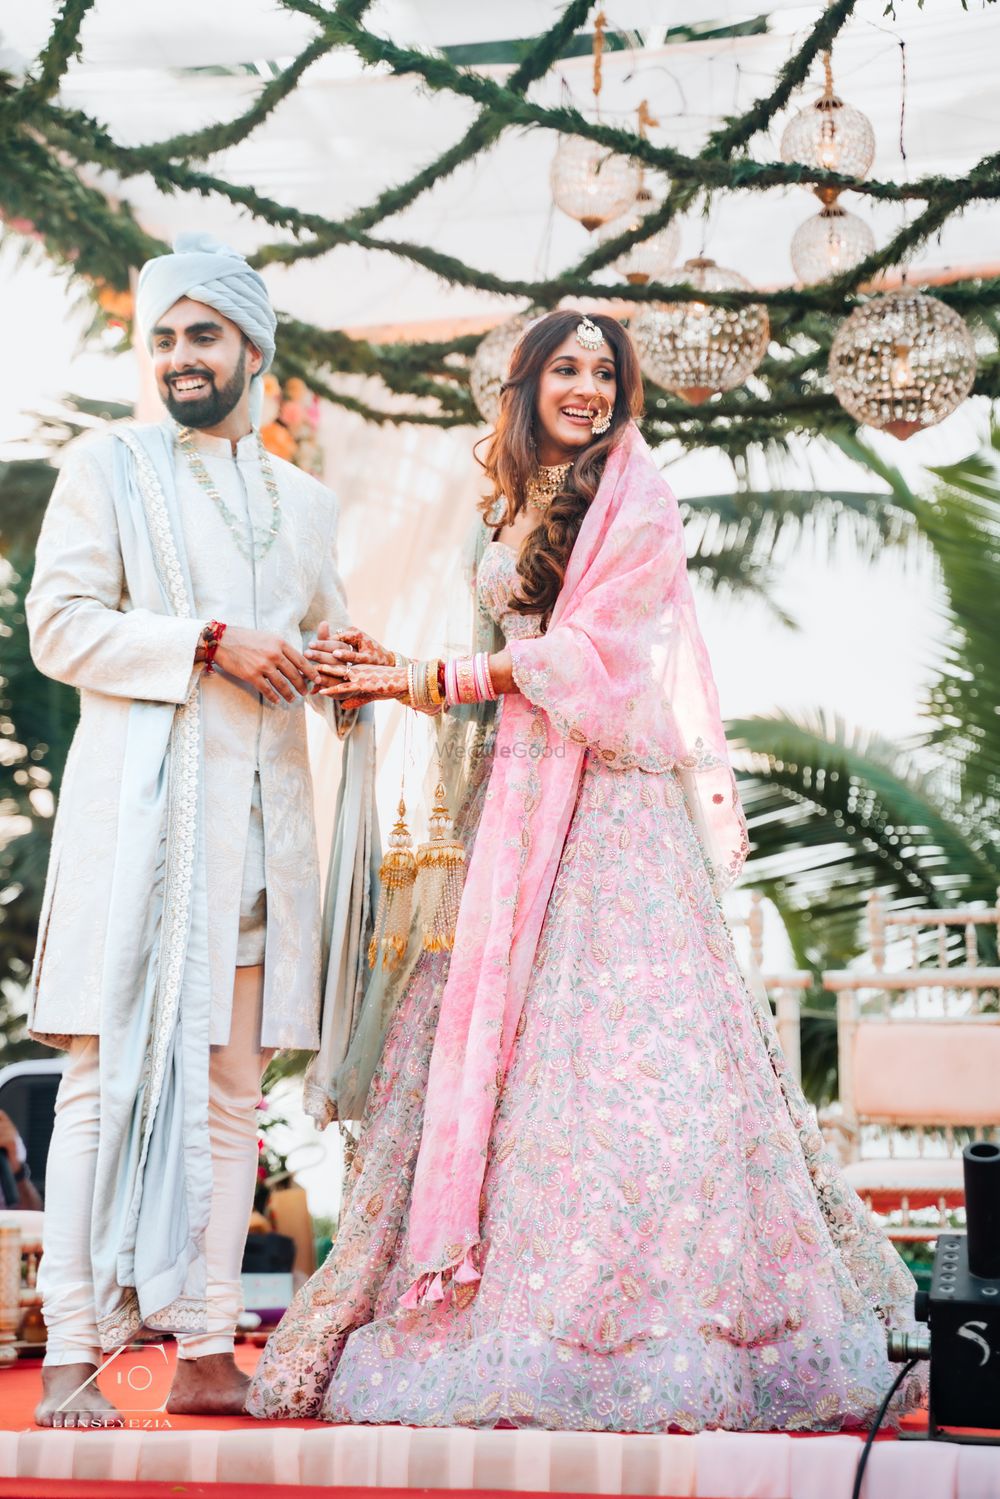 Photo of Bride and groom in pastel wedding outfits